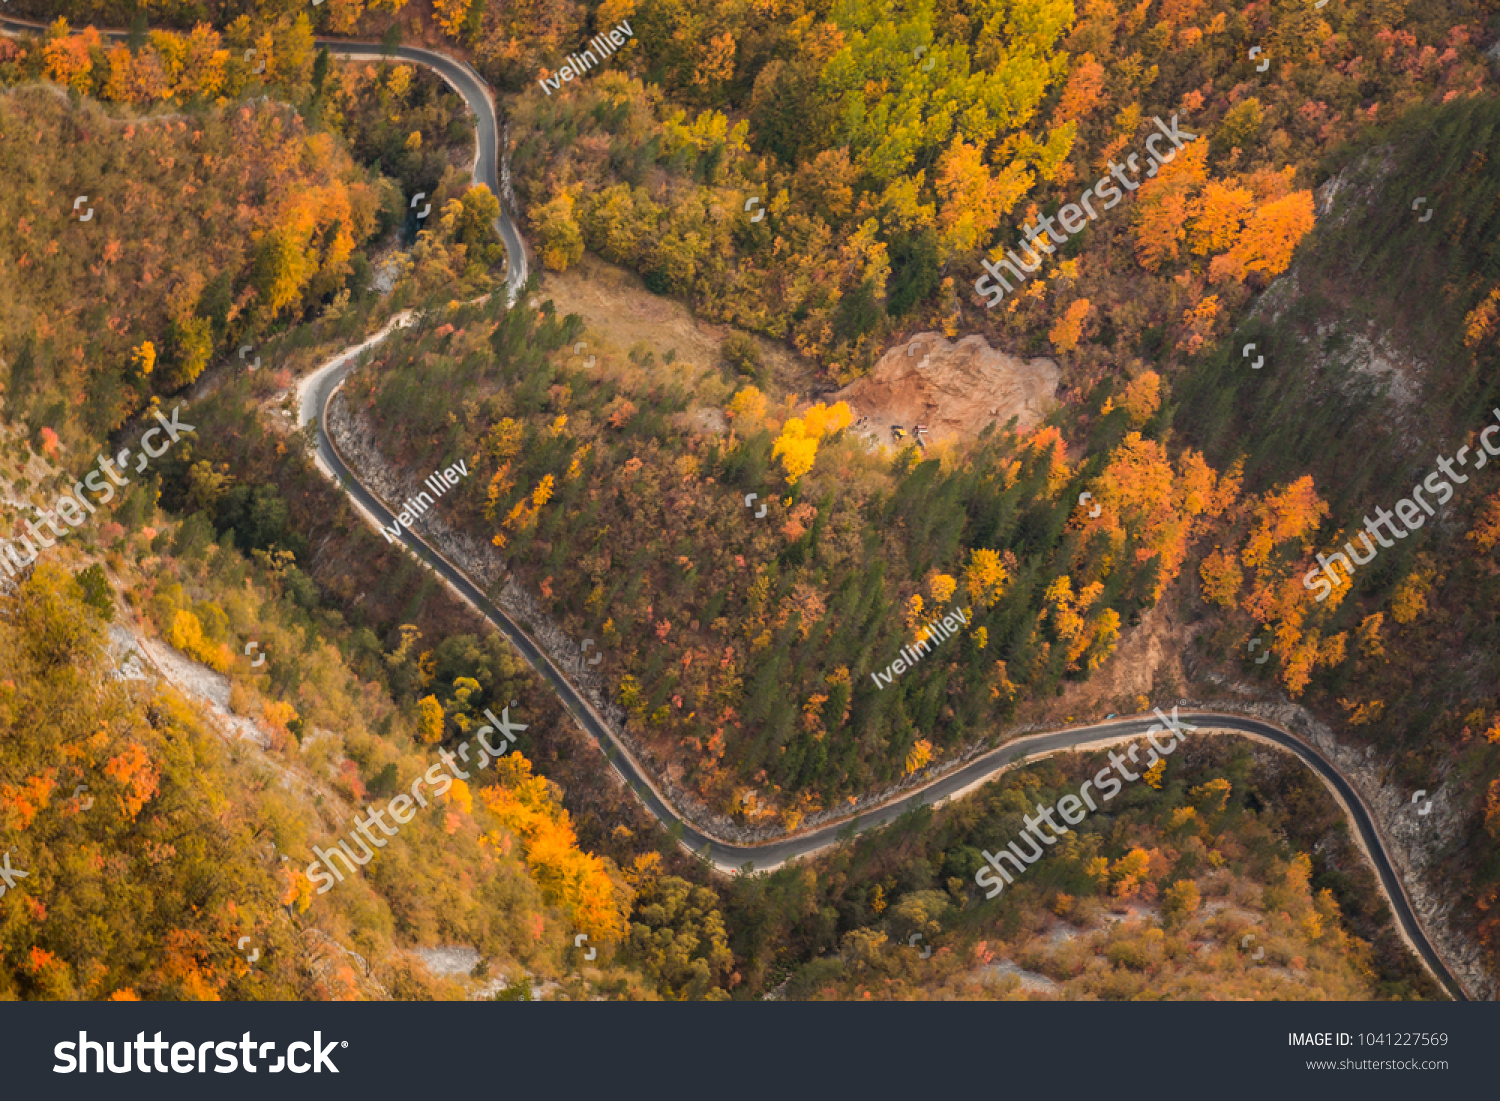 Aerial view of thick forest in autumn with road cutting through #1041227569